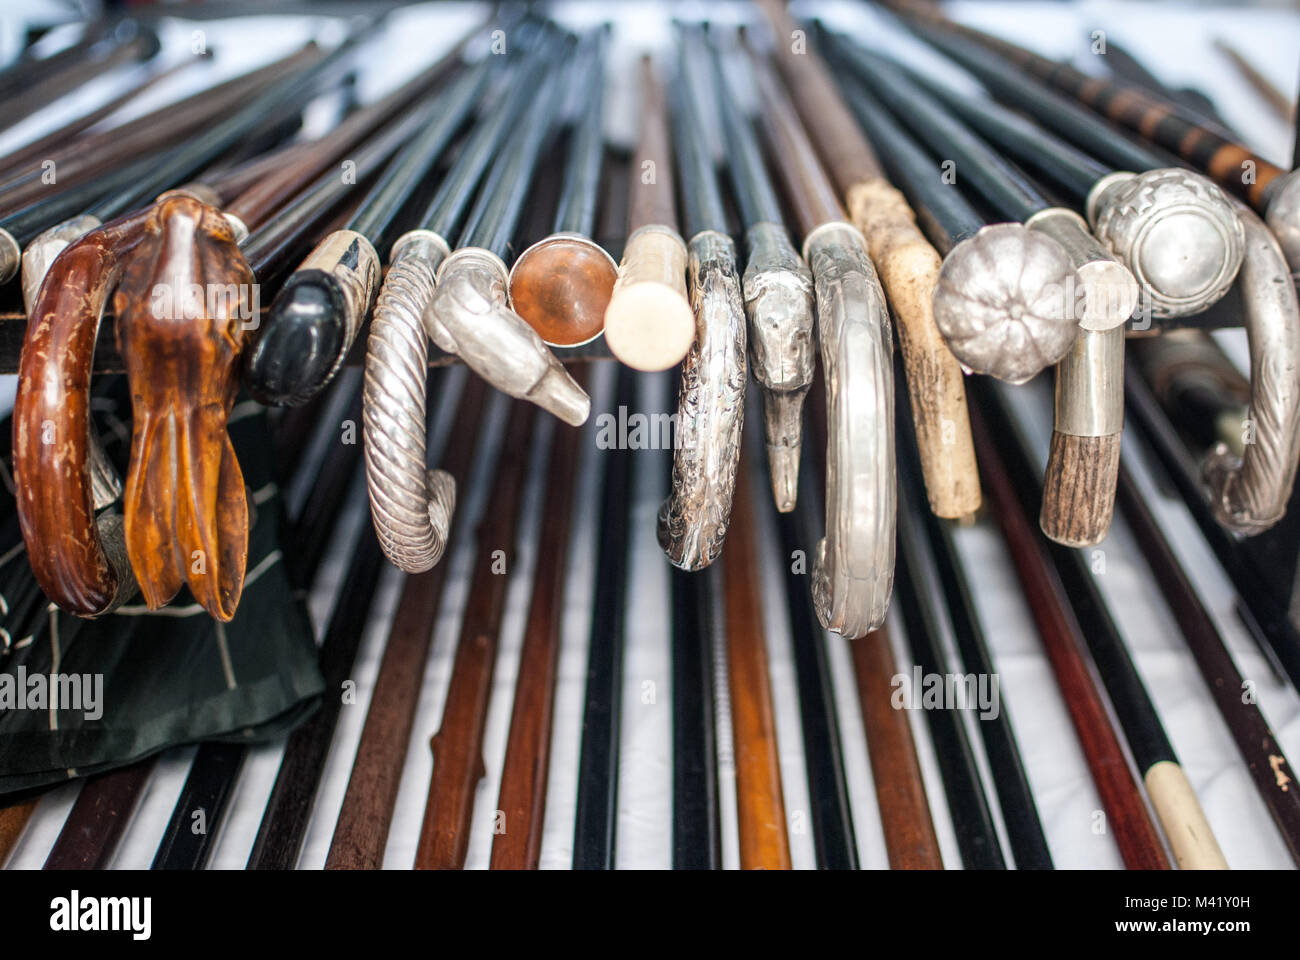 Lots of walking sticks arranged together on a stall at a market in Buenos Aires, Argentina Stock Photo